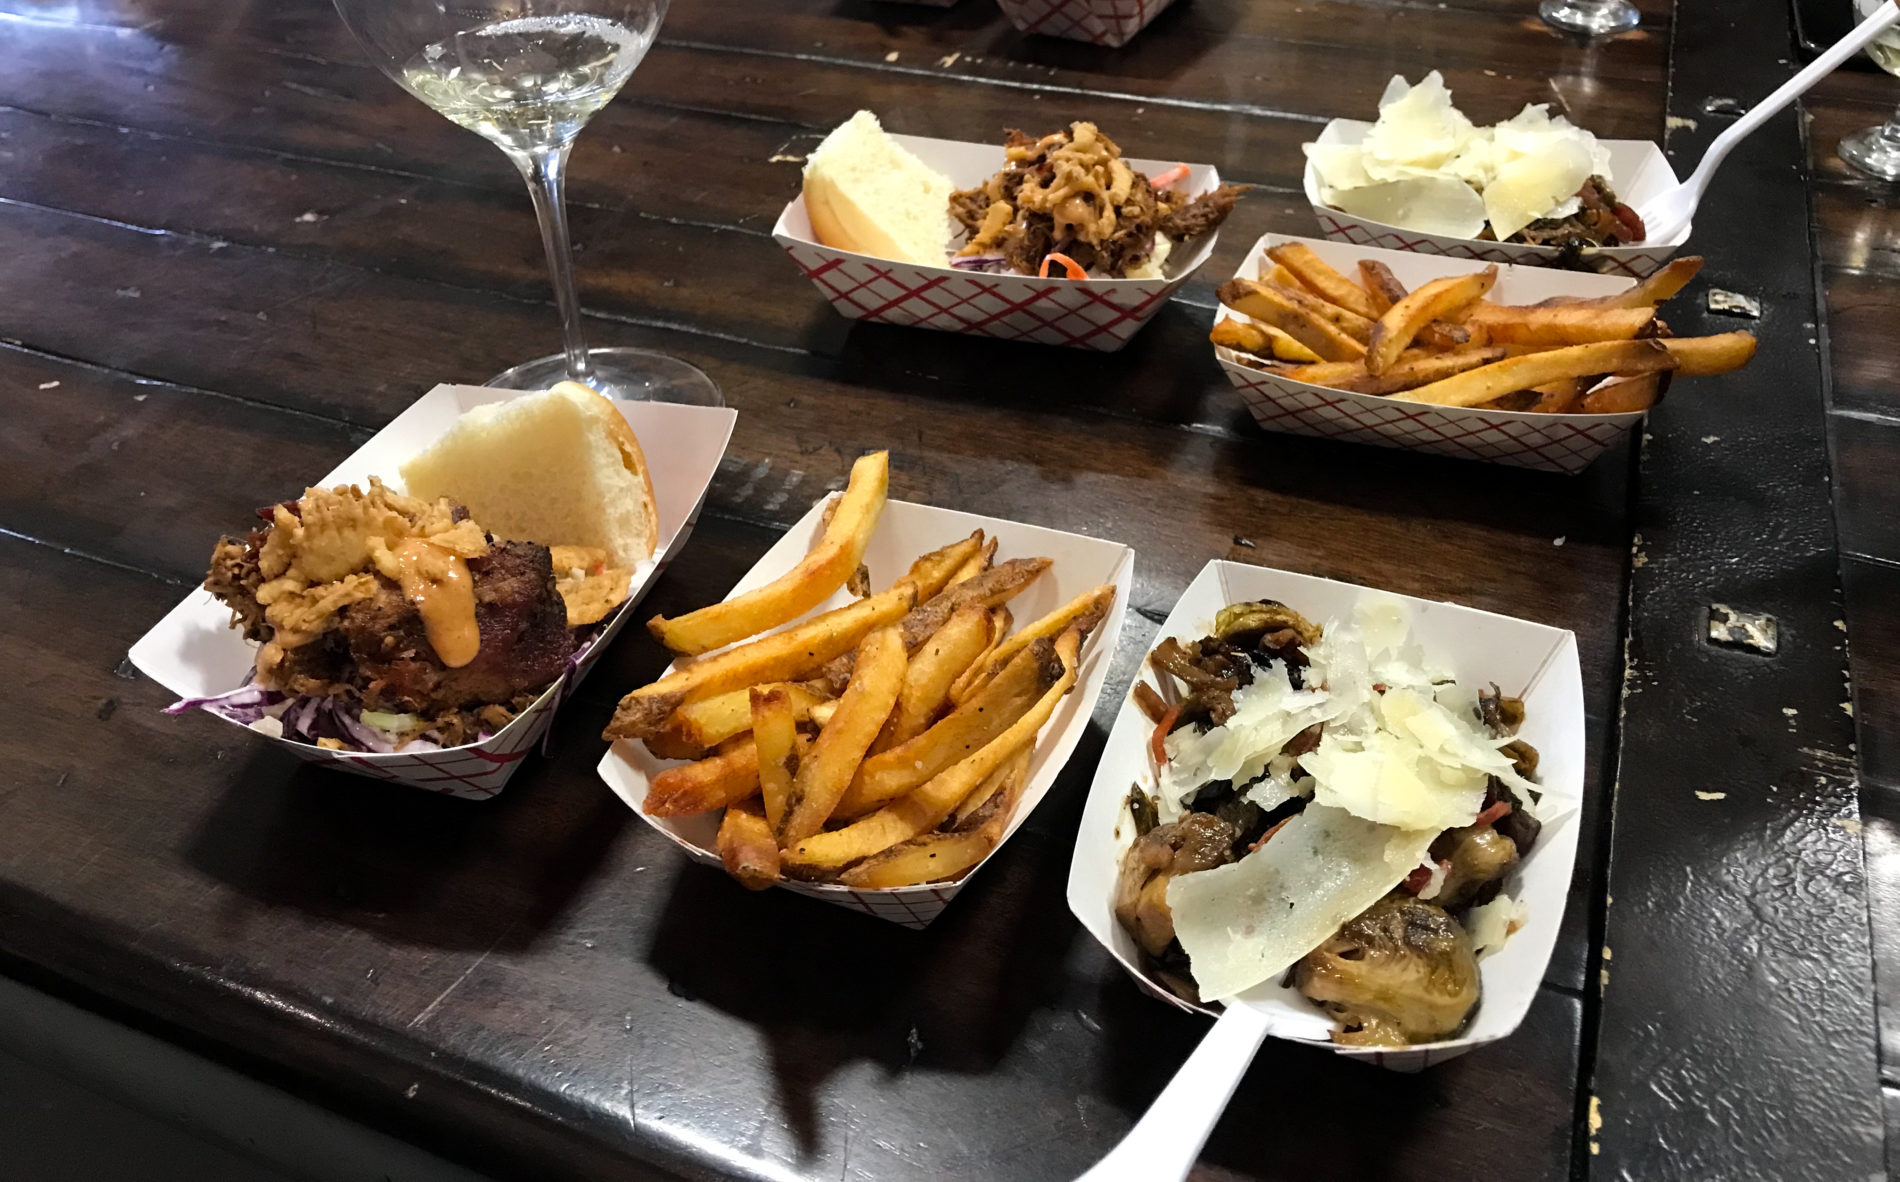 Whistran Steak and Spirits brought these three dishes into our wine tasting room at Airfield.